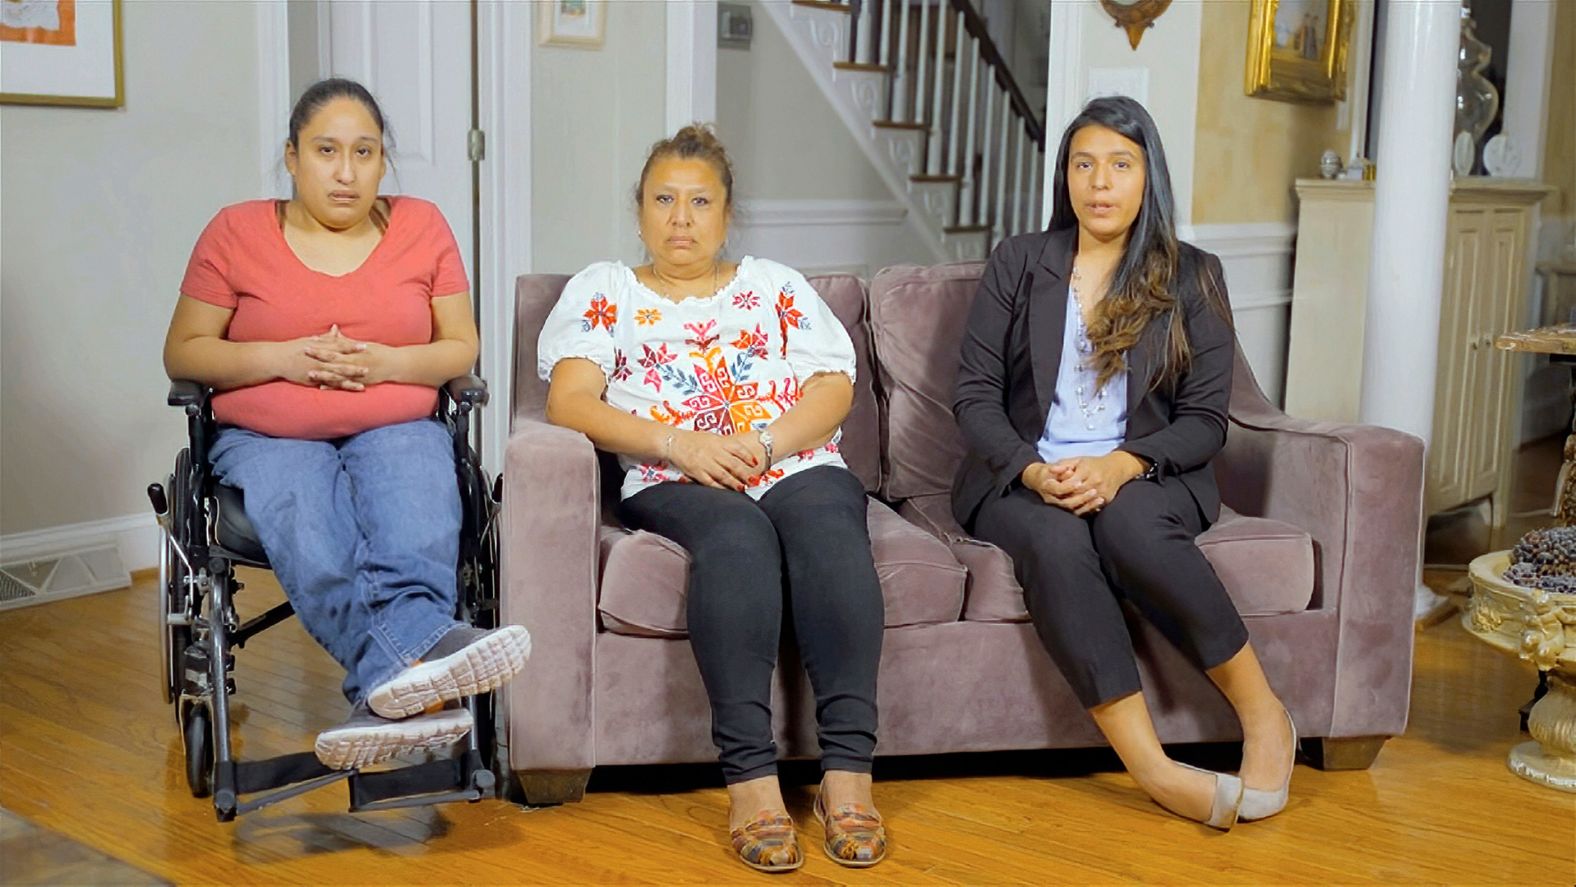 Silvia Sanchez, an undocumented immigrant in North Carolina, <a href="index.php?page=&url=https%3A%2F%2Fwww.cnn.com%2Fpolitics%2Flive-news%2Fdnc-2020-day-3%2Fh_e46082e757324e630180fb3aec22e8c9" target="_blank">shared her story</a> alongside daughters Jessica and Lucy on Wednesday. Silvia said that she did what any mother would do to "save her daughter's life" after Jessica was born without a fully developed spinal cord. She said she took her daughter and "traveled for days" to reach the border and then cross into the United States. Jessica called on Americans to vote for a leader who "will fix the broken immigration system and commit to keeping families together."